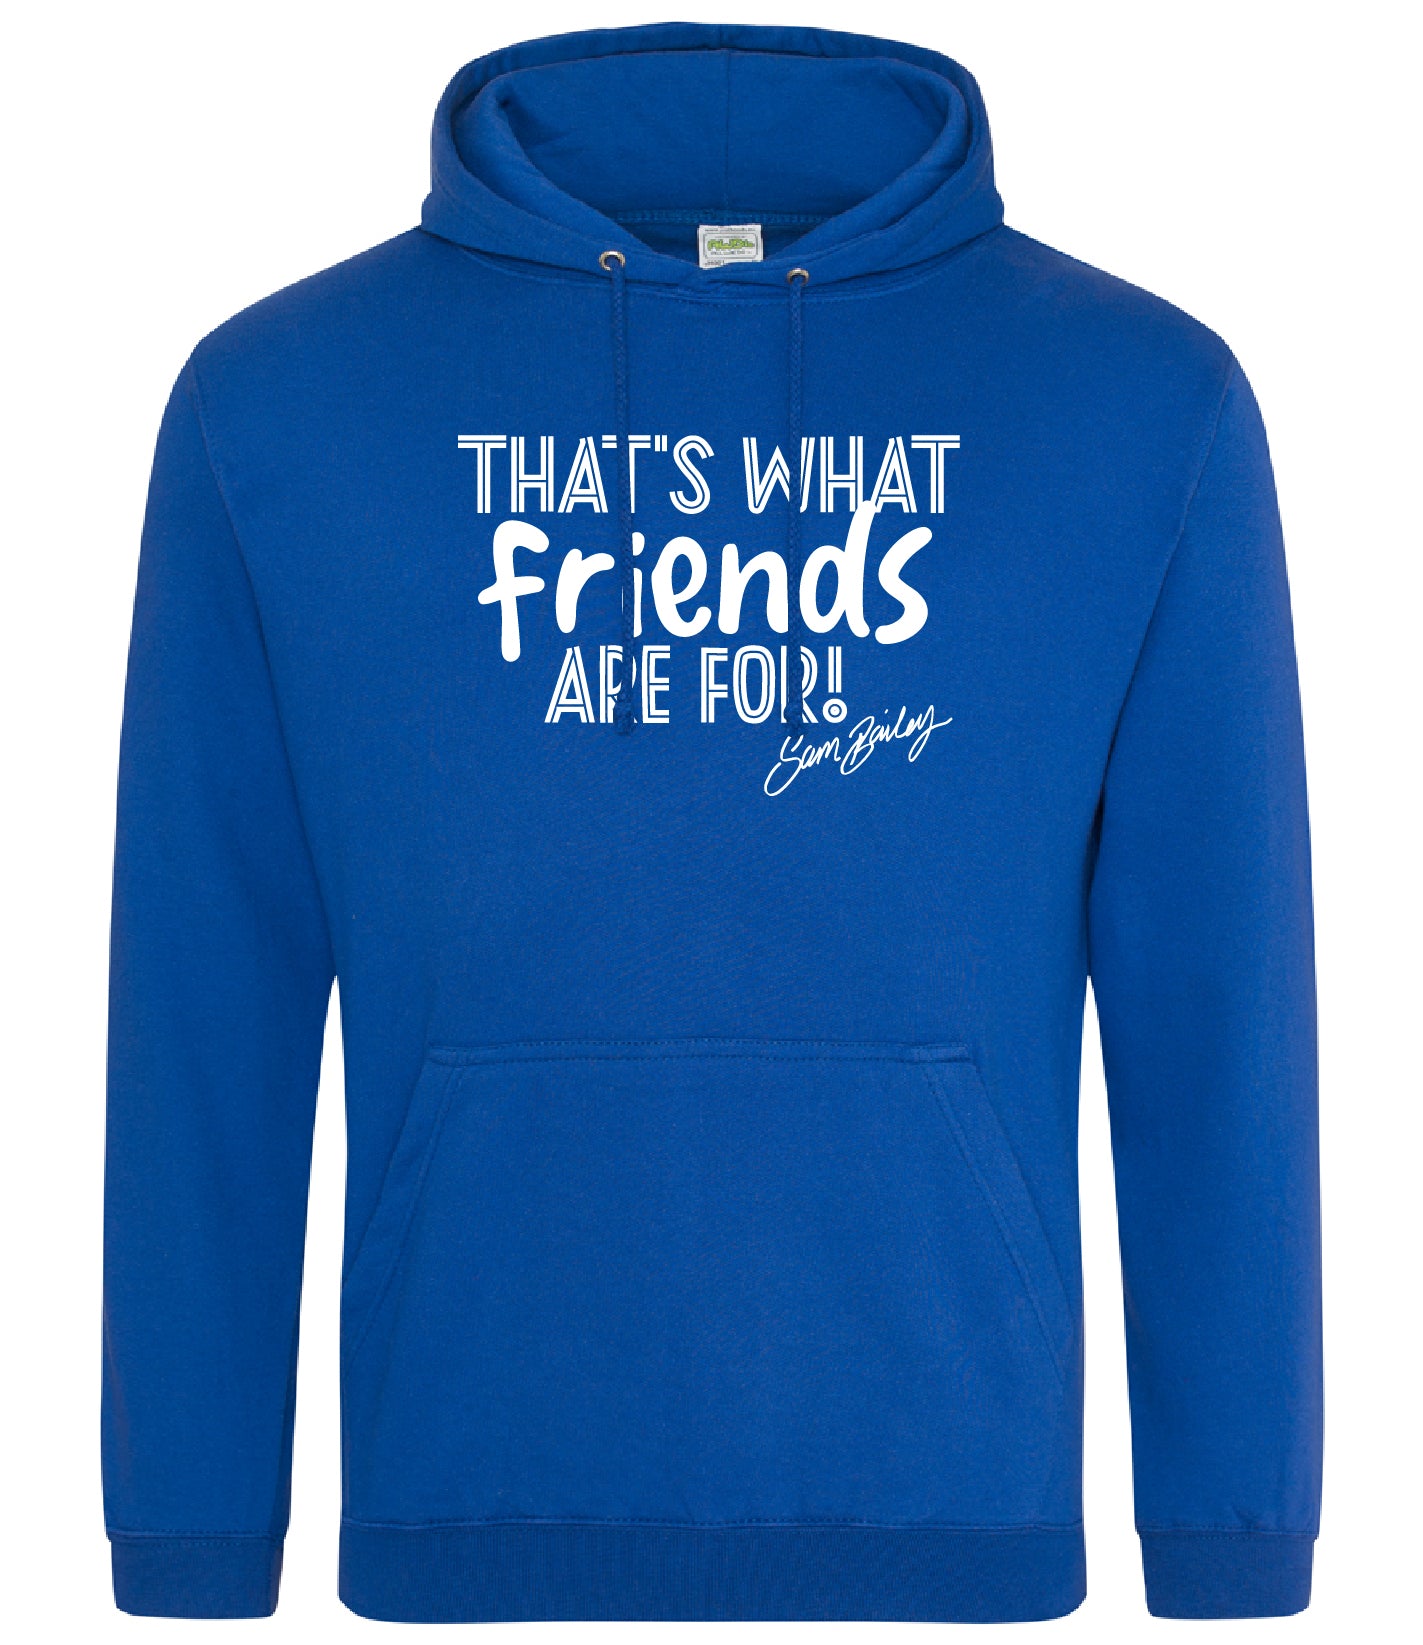 That's What Friends Are For Hoodie